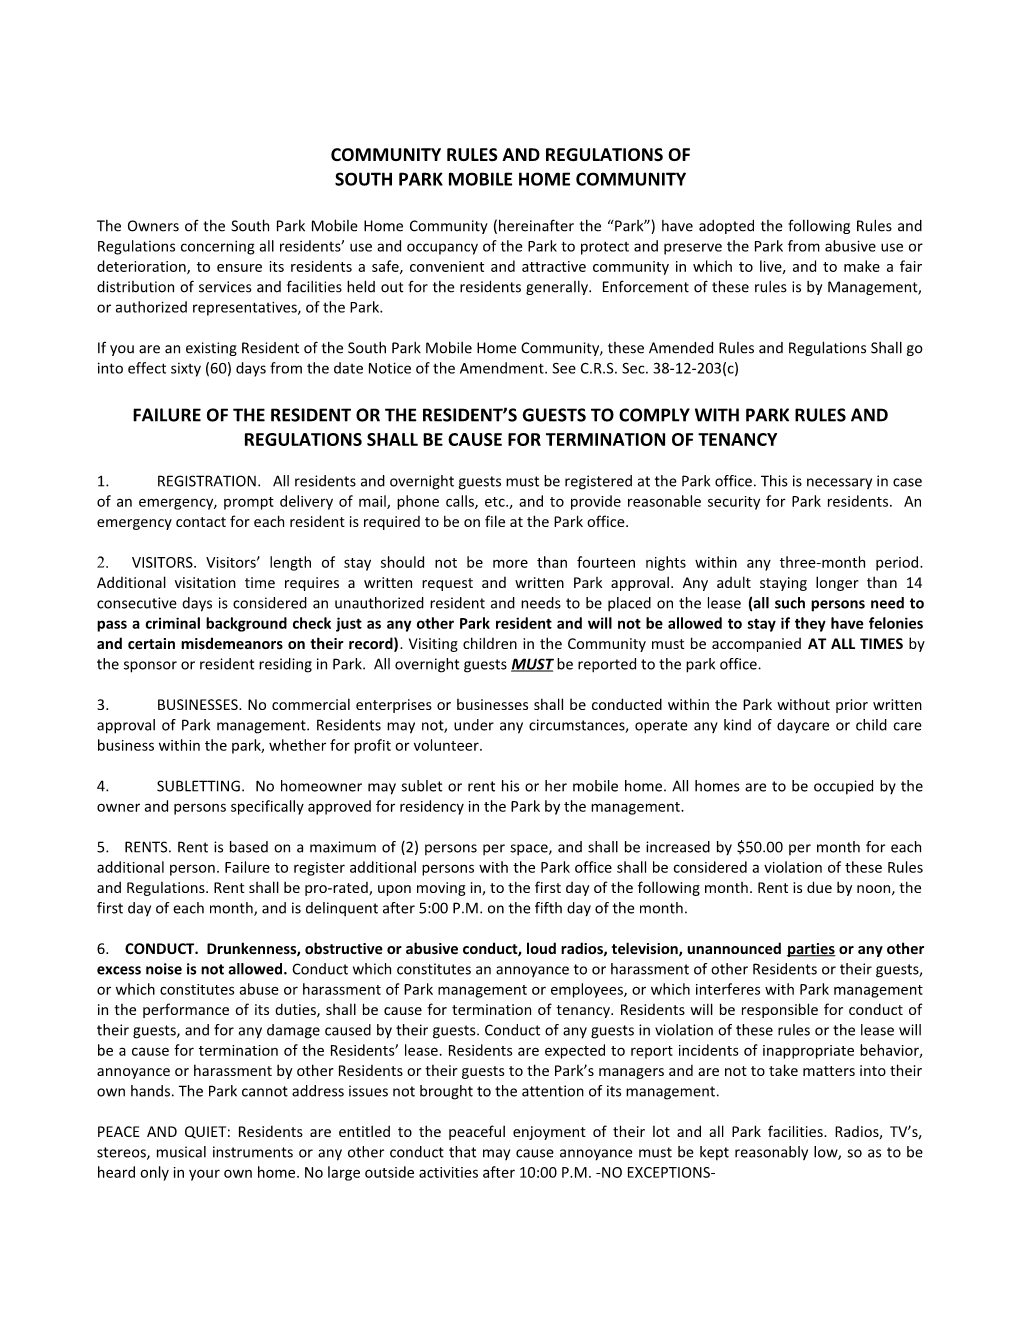 Community Rules and Regulations Of